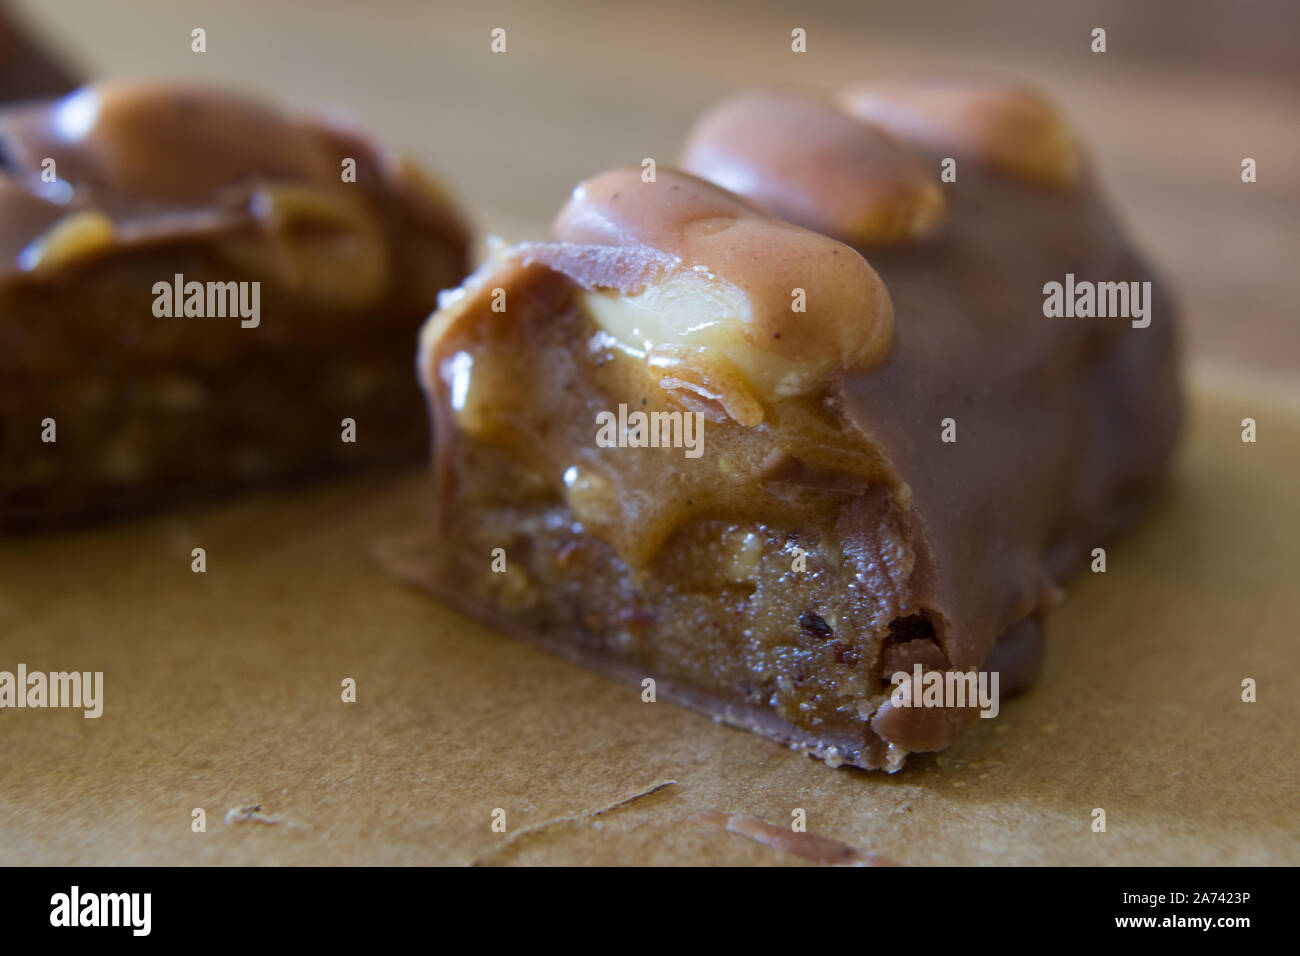 Food photography of a raw food chocolate bar with peanuts and caramel Stock Photo